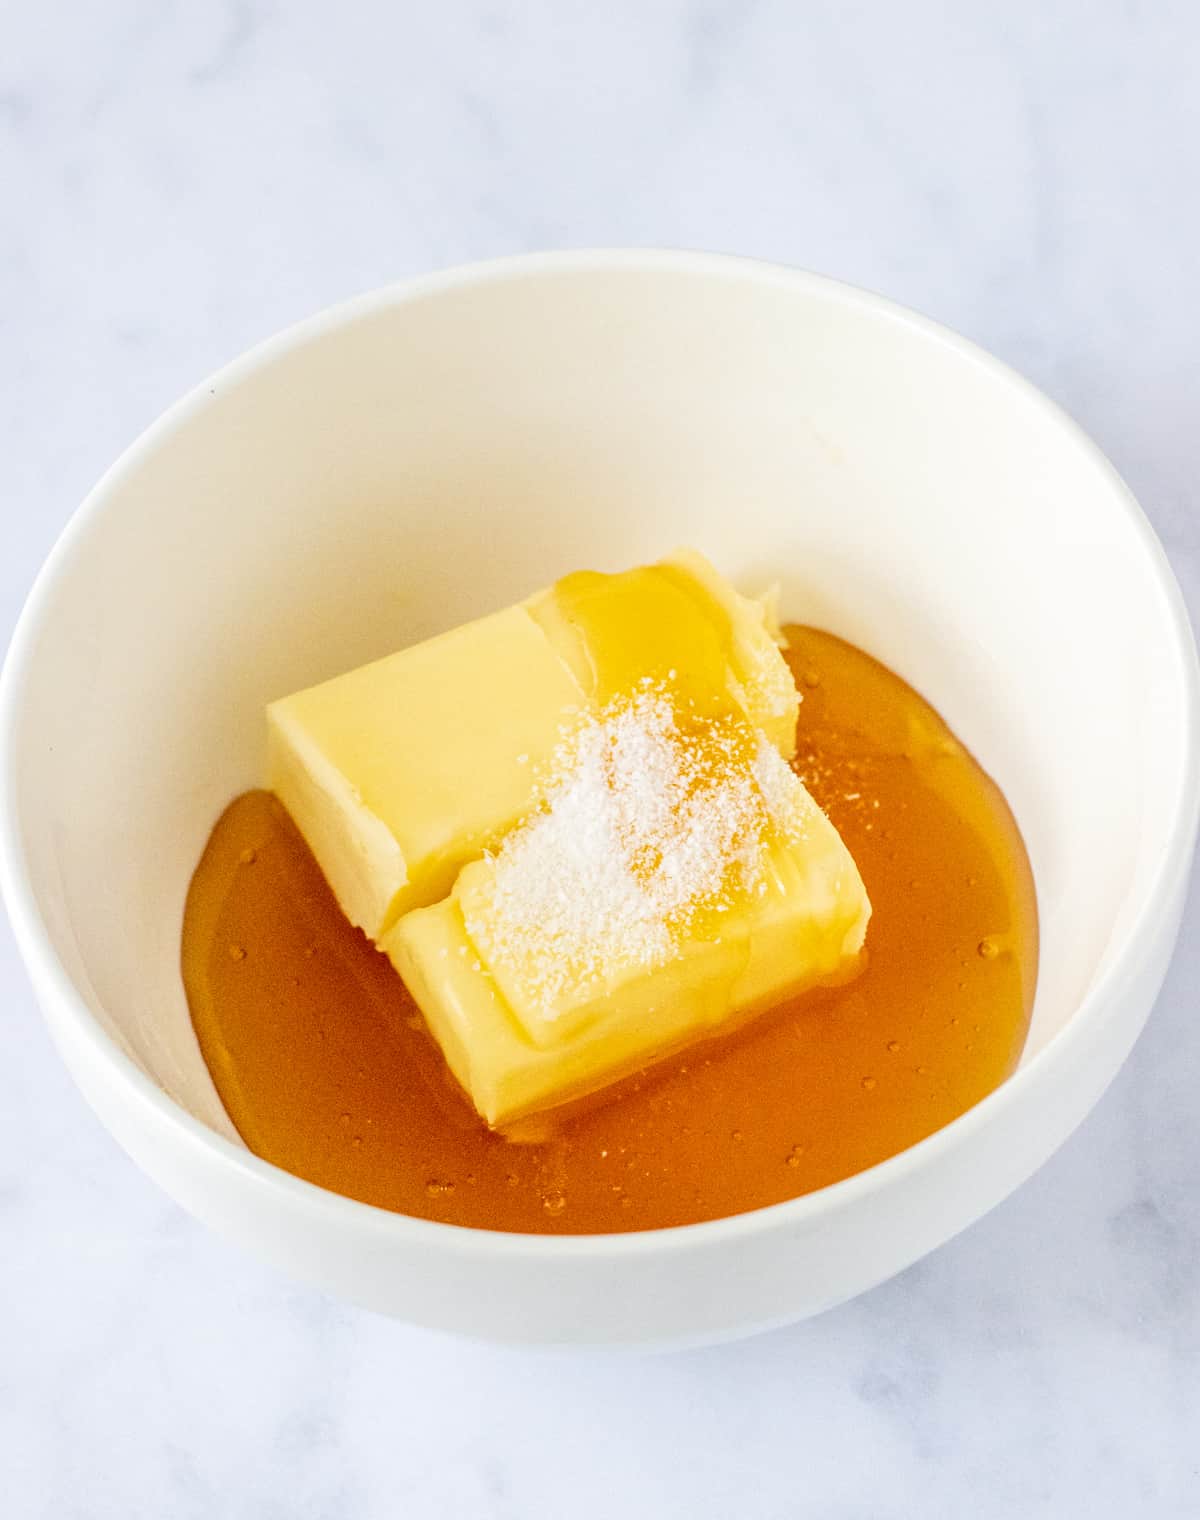 Butter, honey, and salt in a bowl.